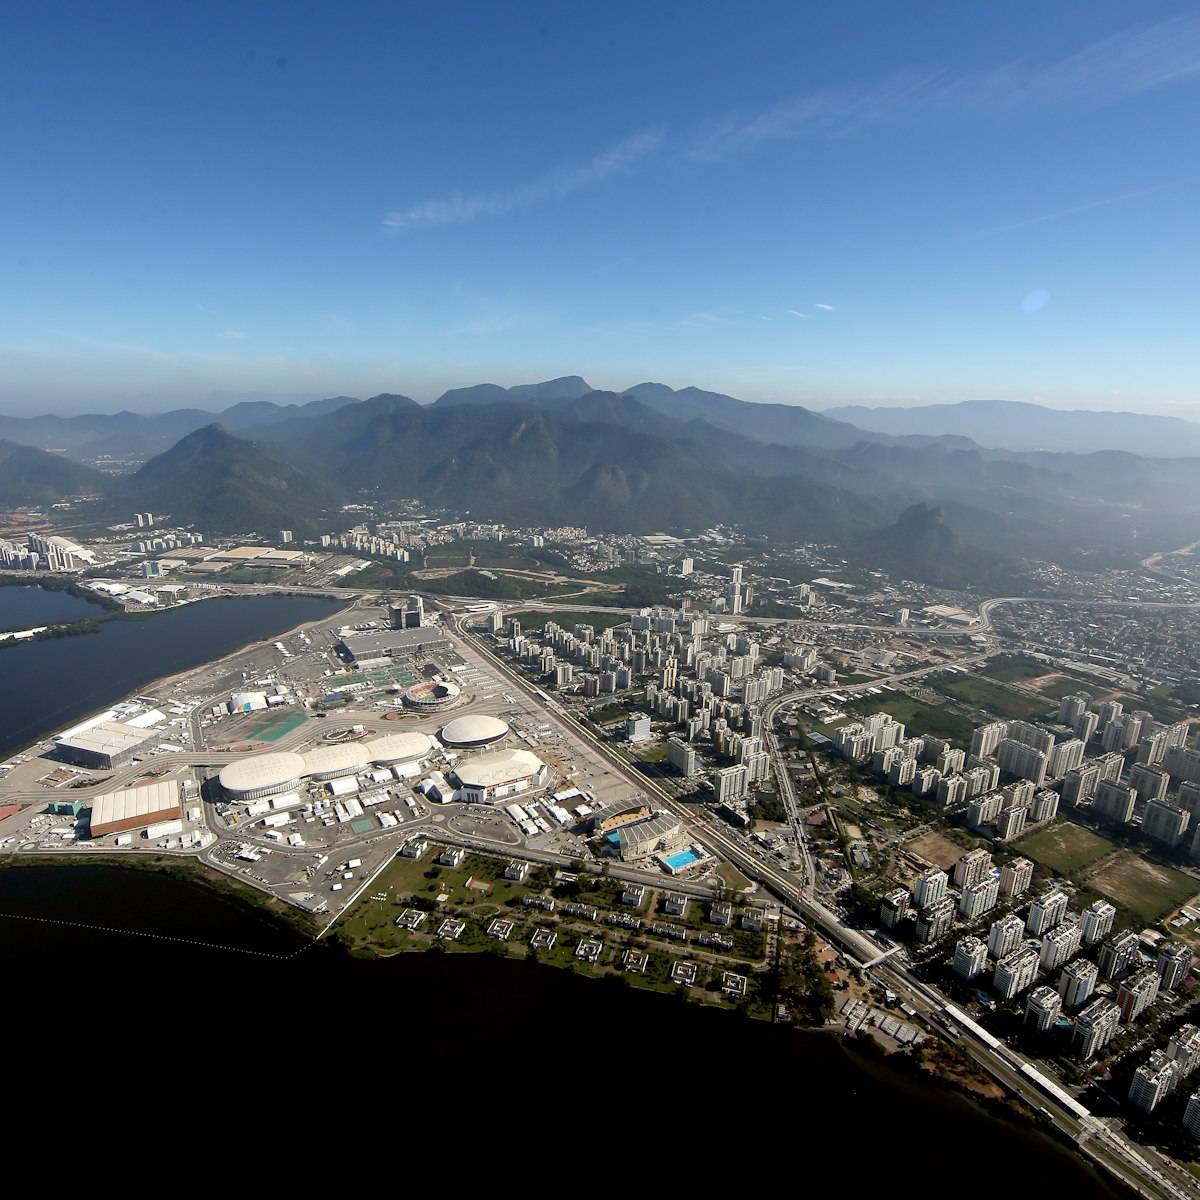 RIO DE JANEIRO, BRAZIL - JULY 04:  Work continues at Olympic Park in preparation for the 2016 Olympic Games on July 4, 2016 in Rio de Janeiro, Brazil.  (Photo by Matthew Stockman/Getty Images)